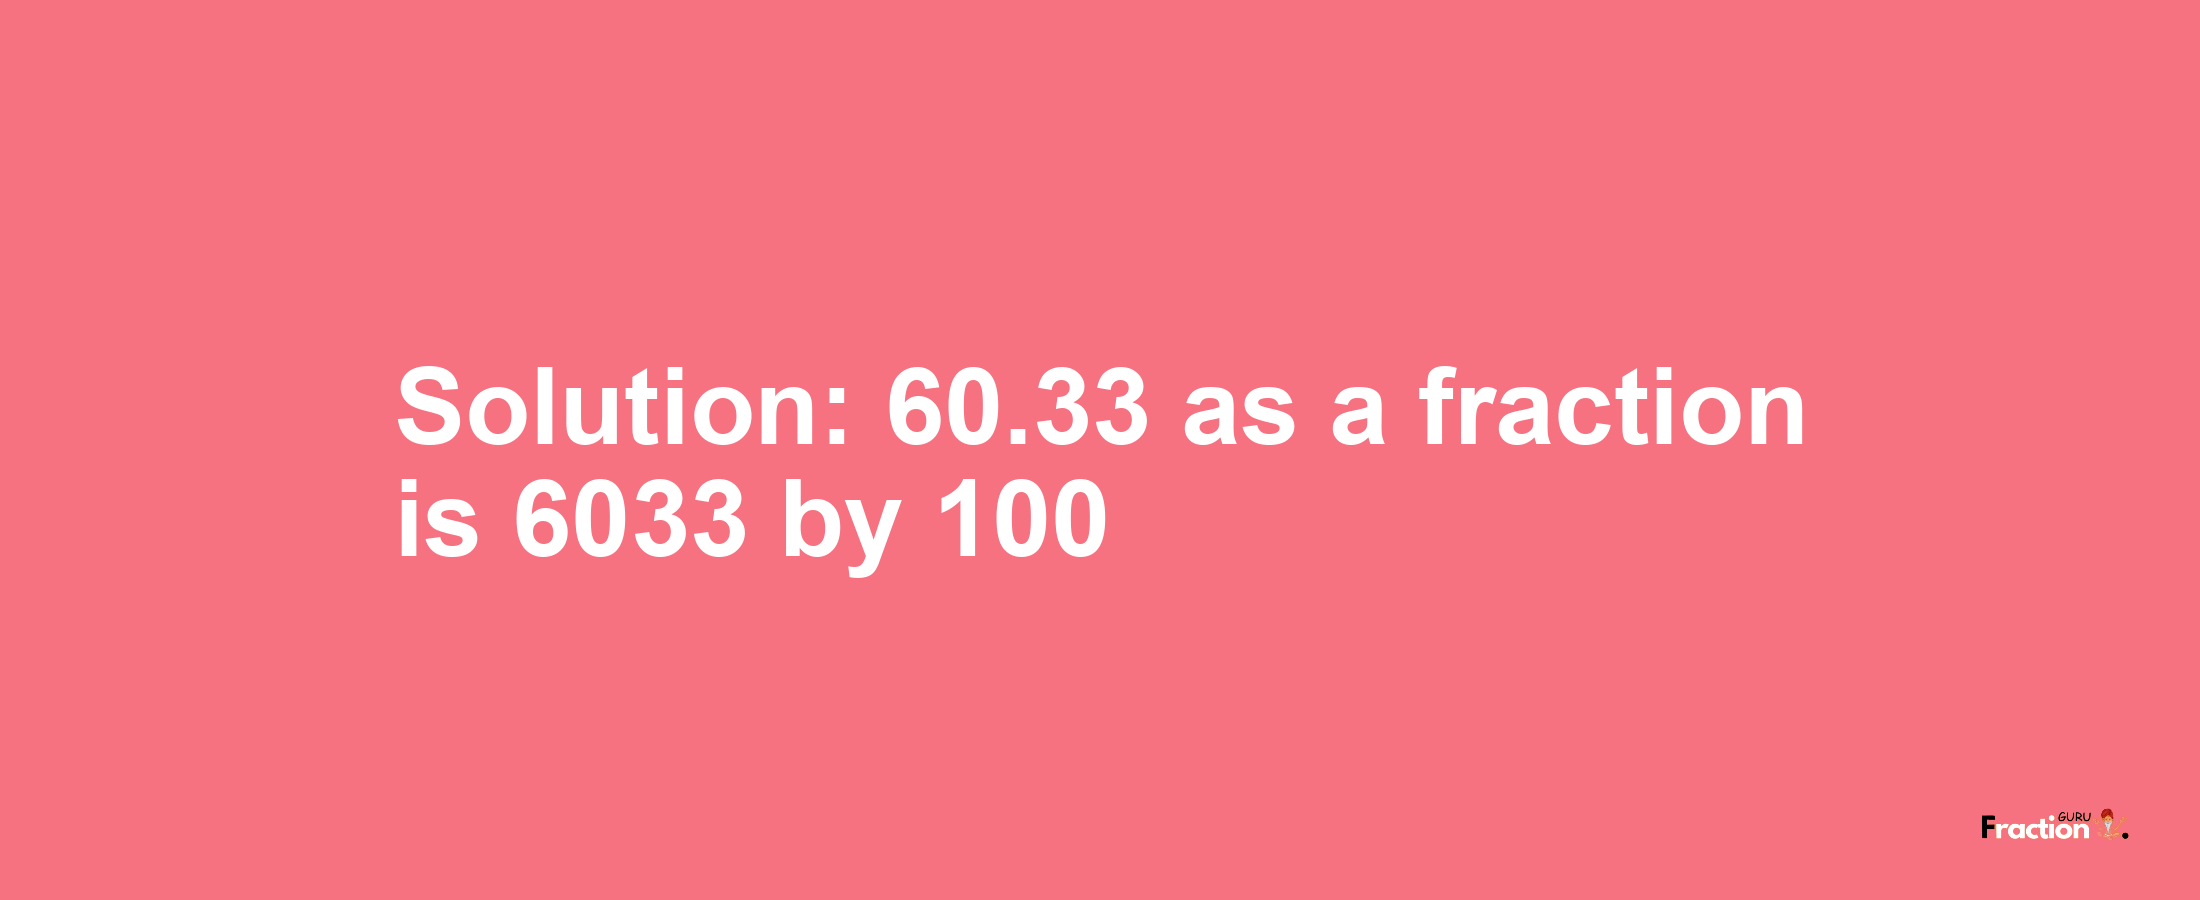 Solution:60.33 as a fraction is 6033/100